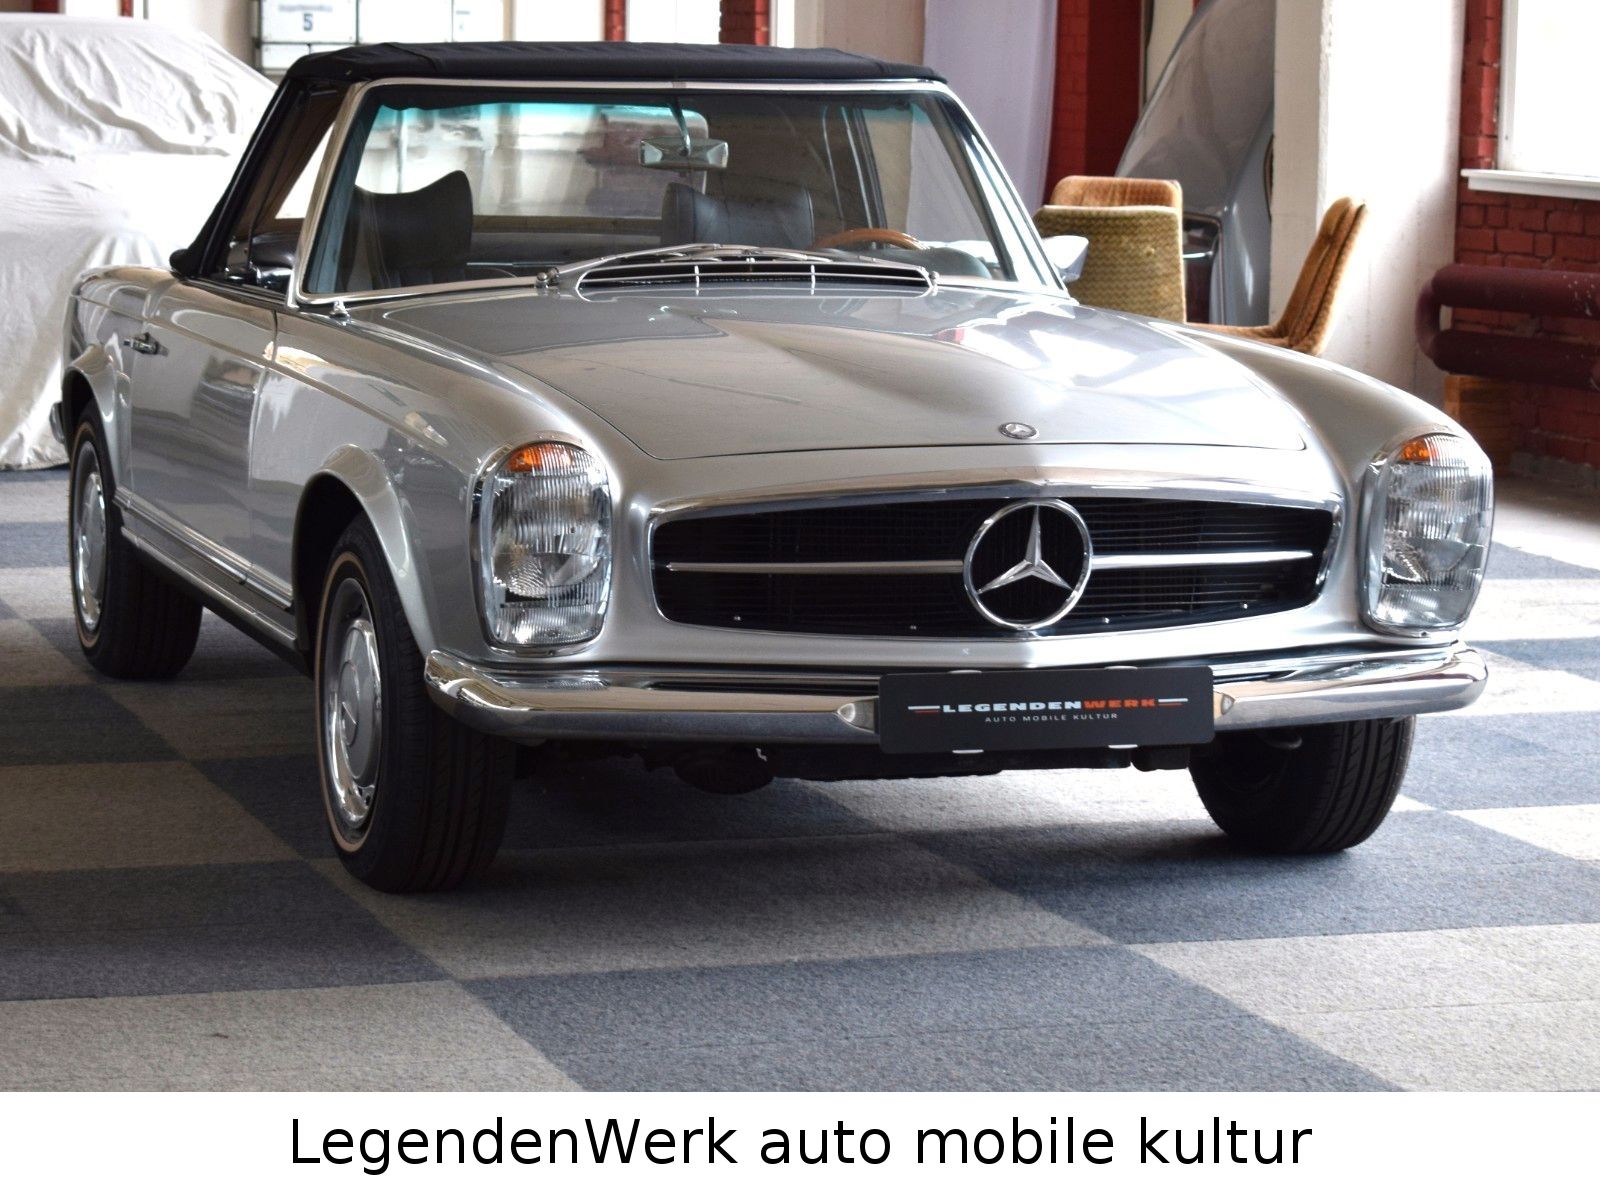 Mercedes-Benz 280 SL Pagode W113 Classic Data Note 2 teilrest.